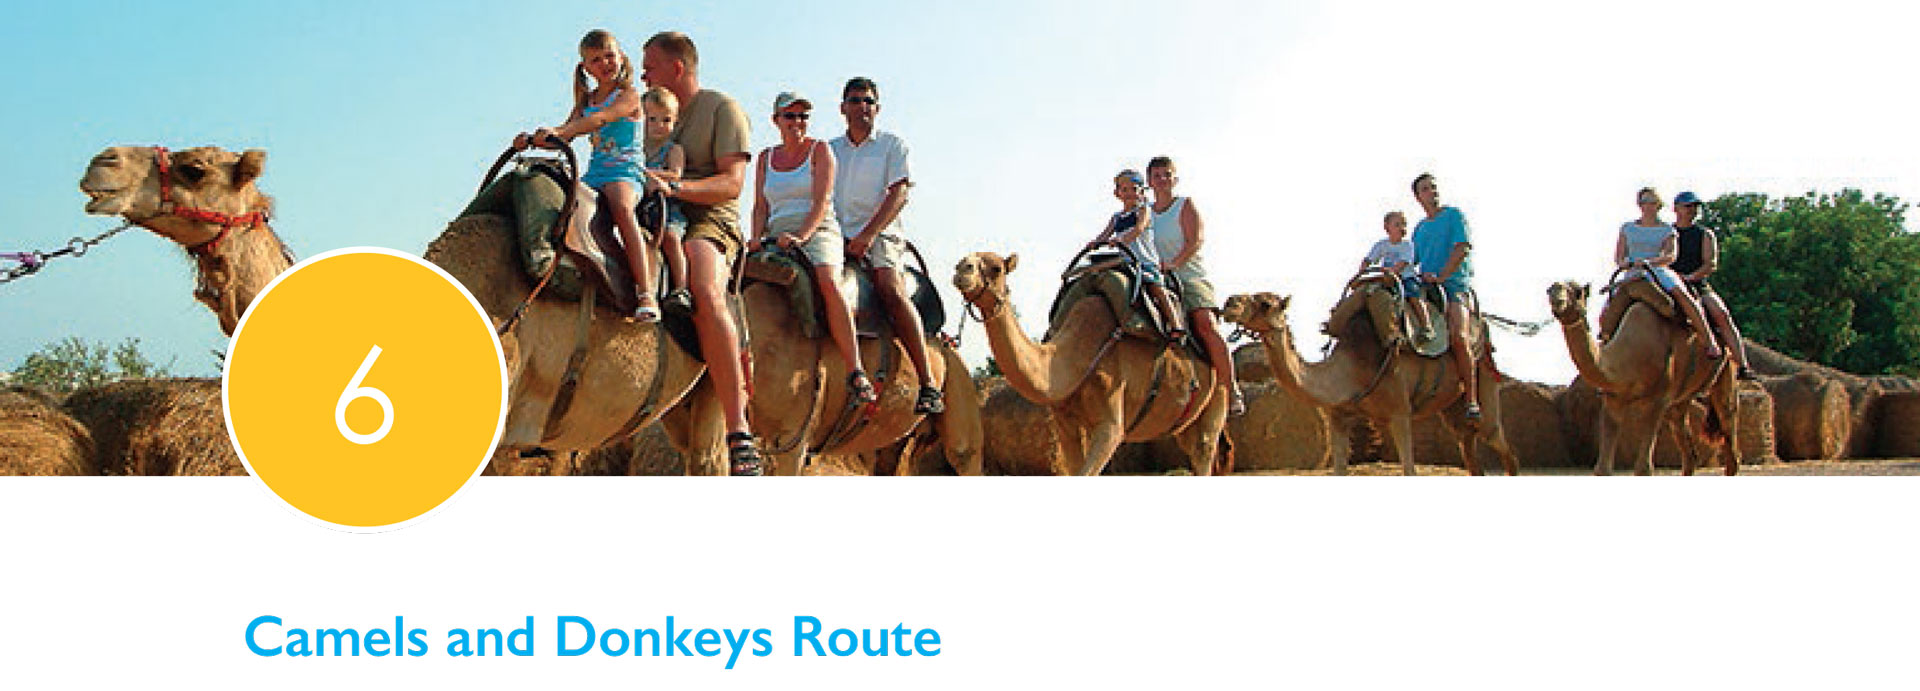 camel-and-donkeys-route